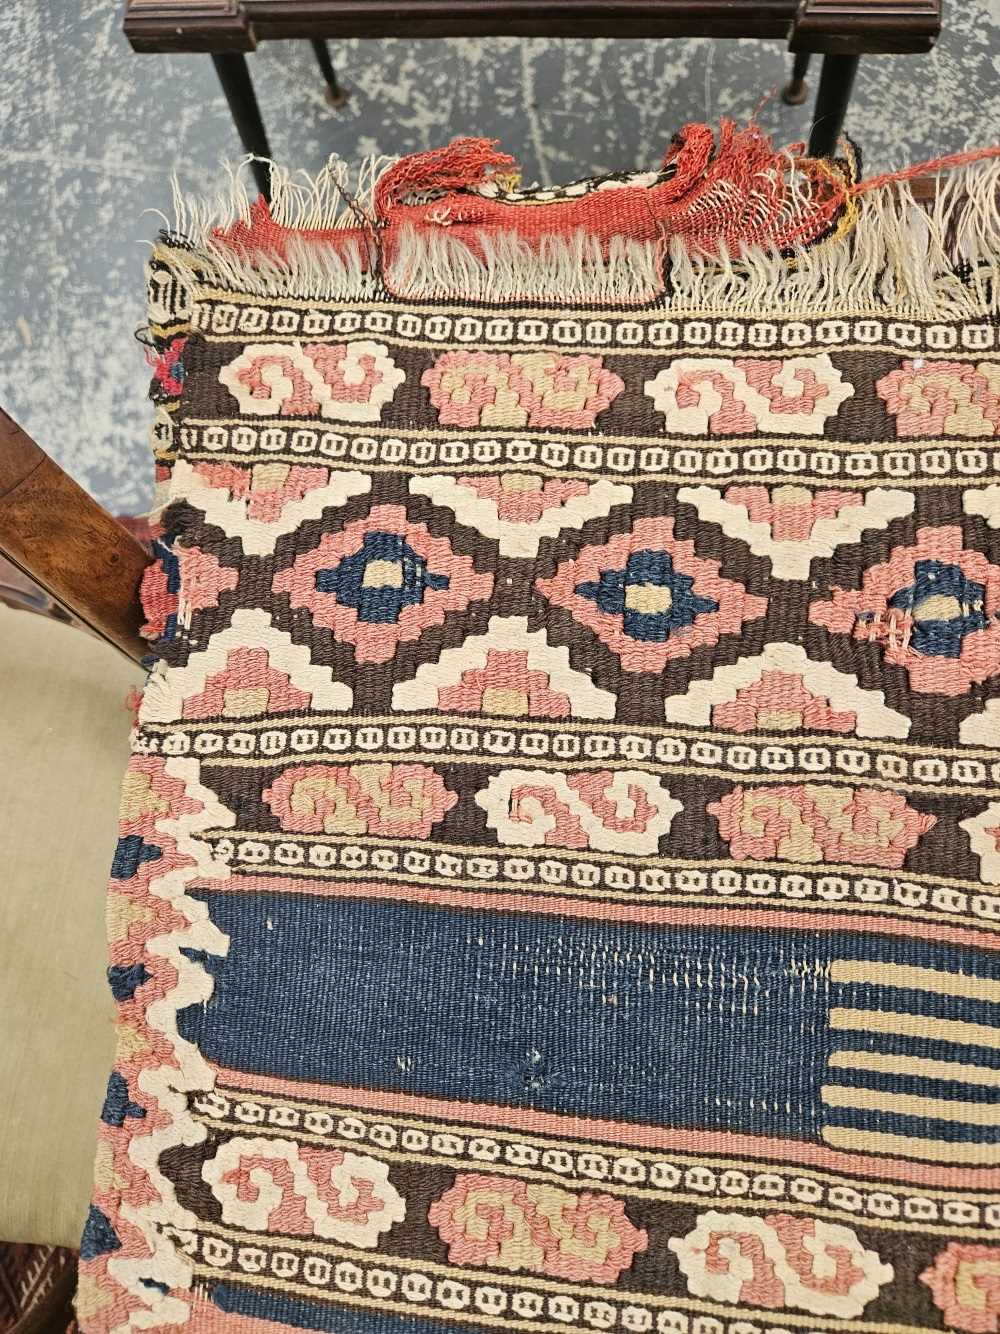 TWO ANTIQUE CAUCASIAN FLAT WEAVE PANELS TOGETHER WITH AN ANTIQUE TURKISH MAT (3) - Image 10 of 41